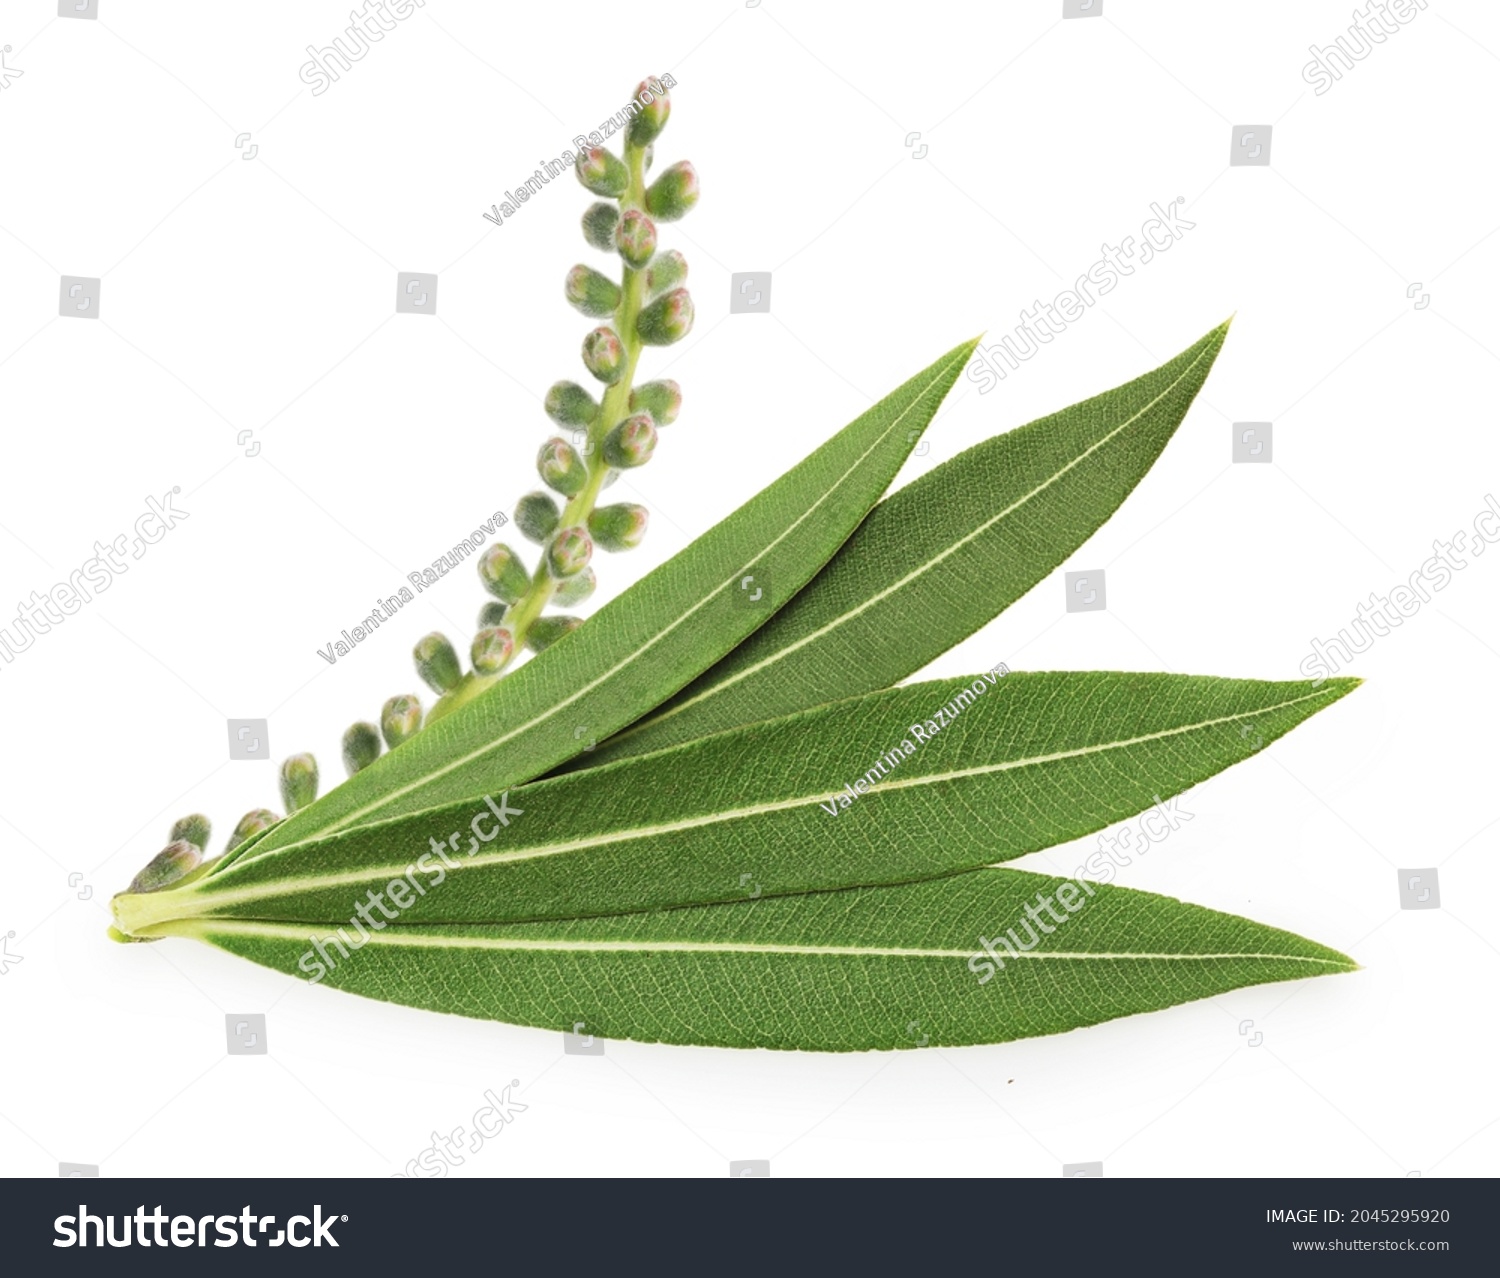 Tea tree, Melaleuca twig with dried leaves and seeds isolated on white background. #2045295920